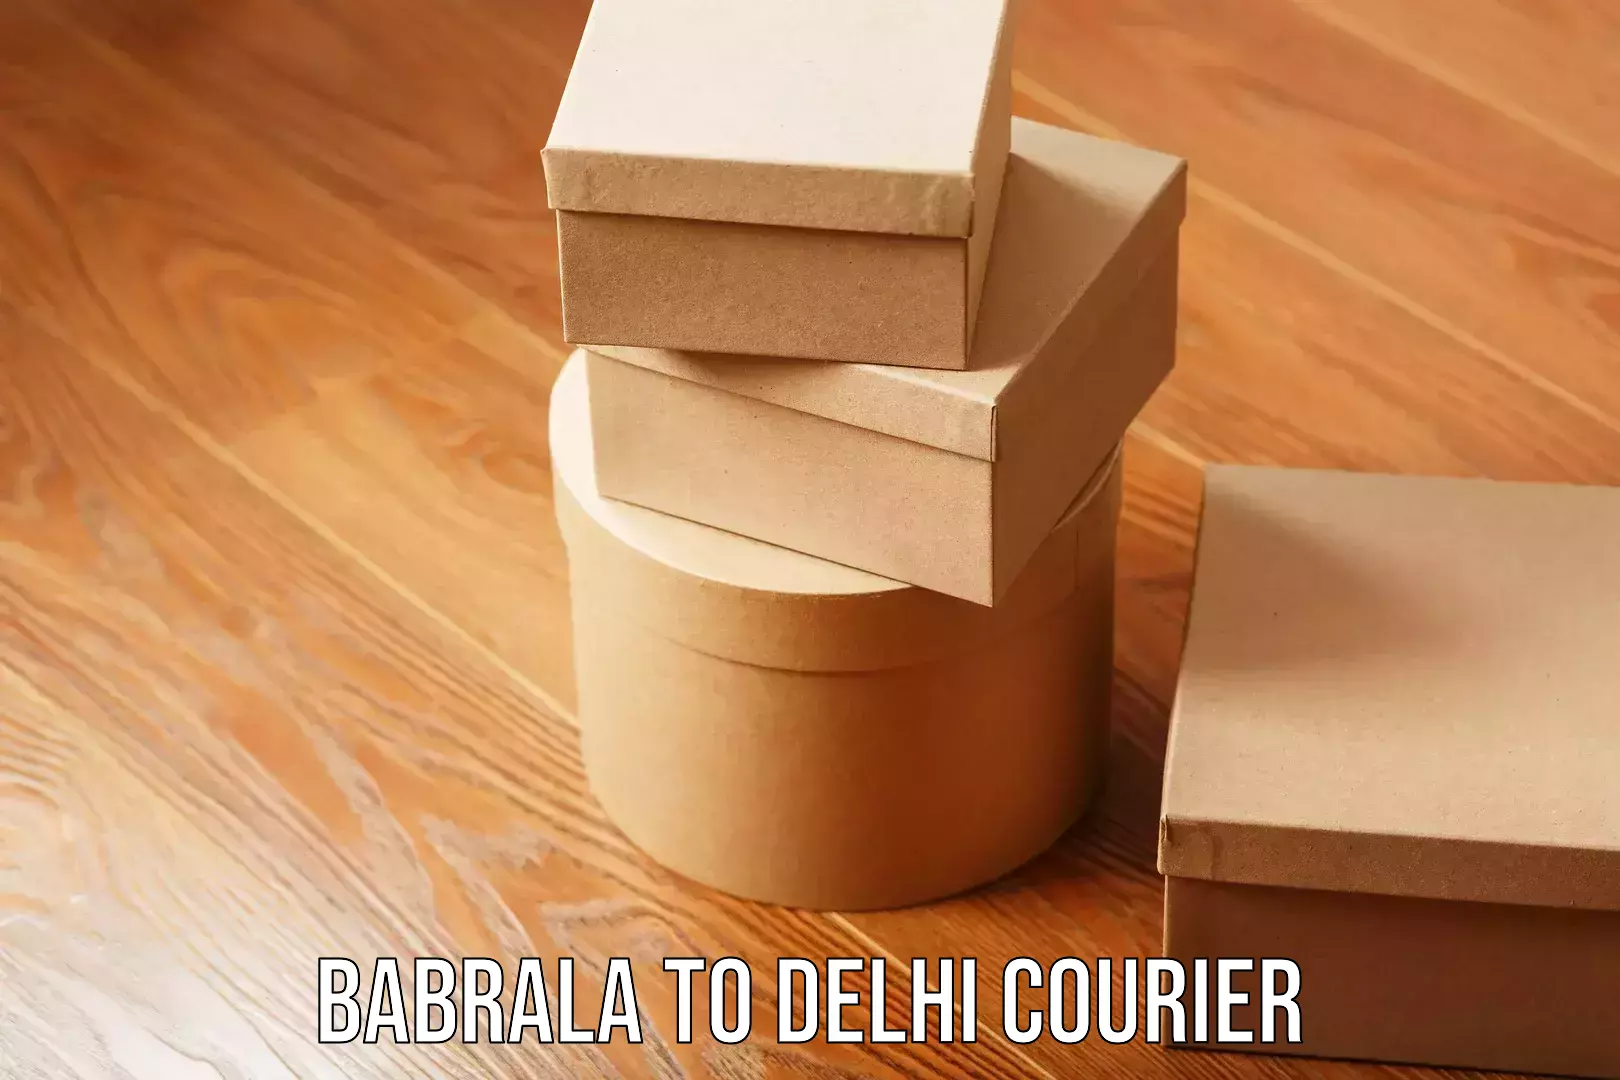 Global courier networks Babrala to Delhi